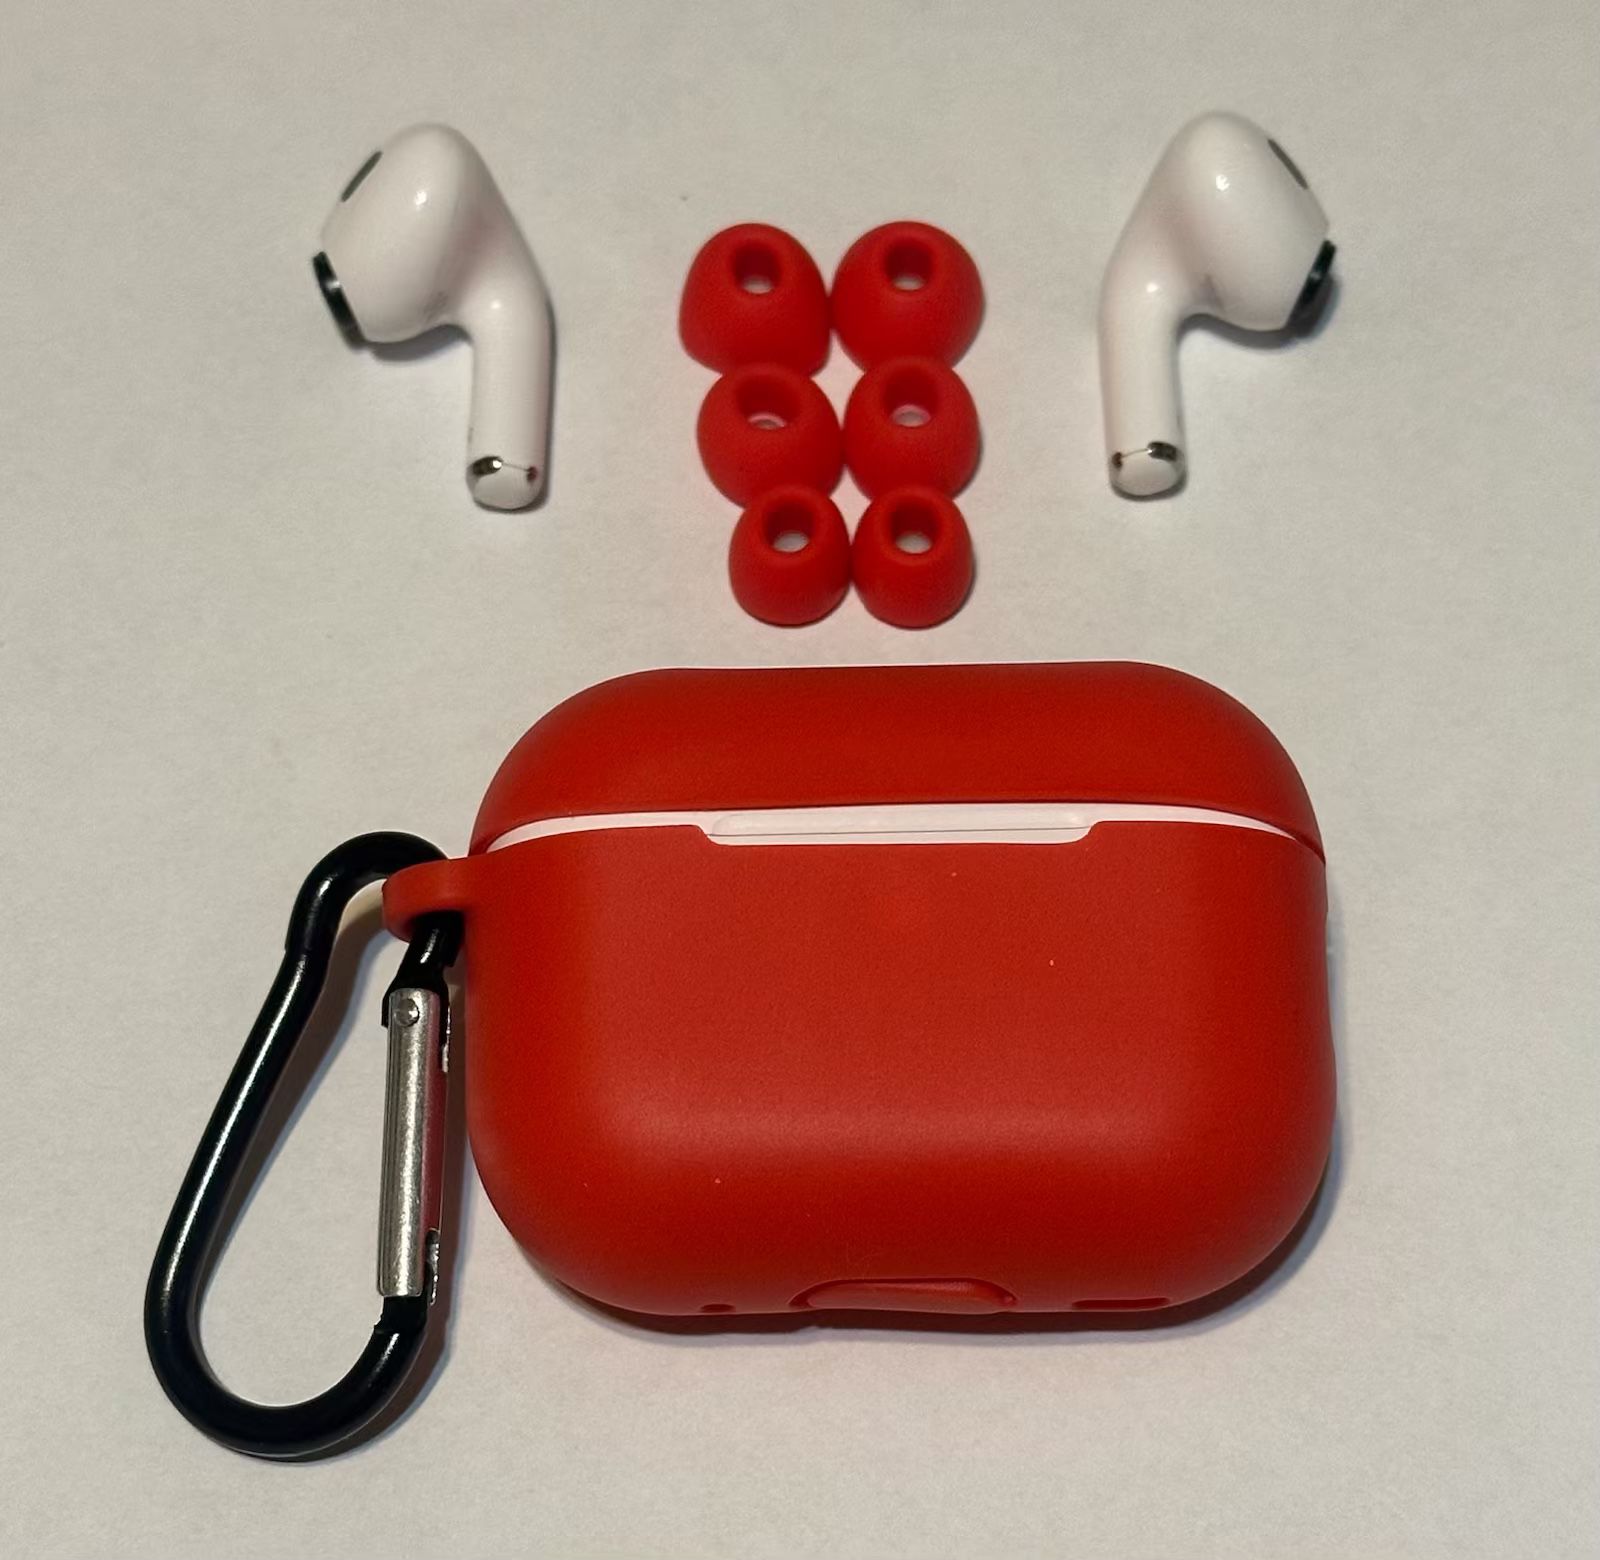 Red AirPods Pro Generation 1 / 2 / 3 Case And Replacement Tips Set Of 6 ( S + M + L )